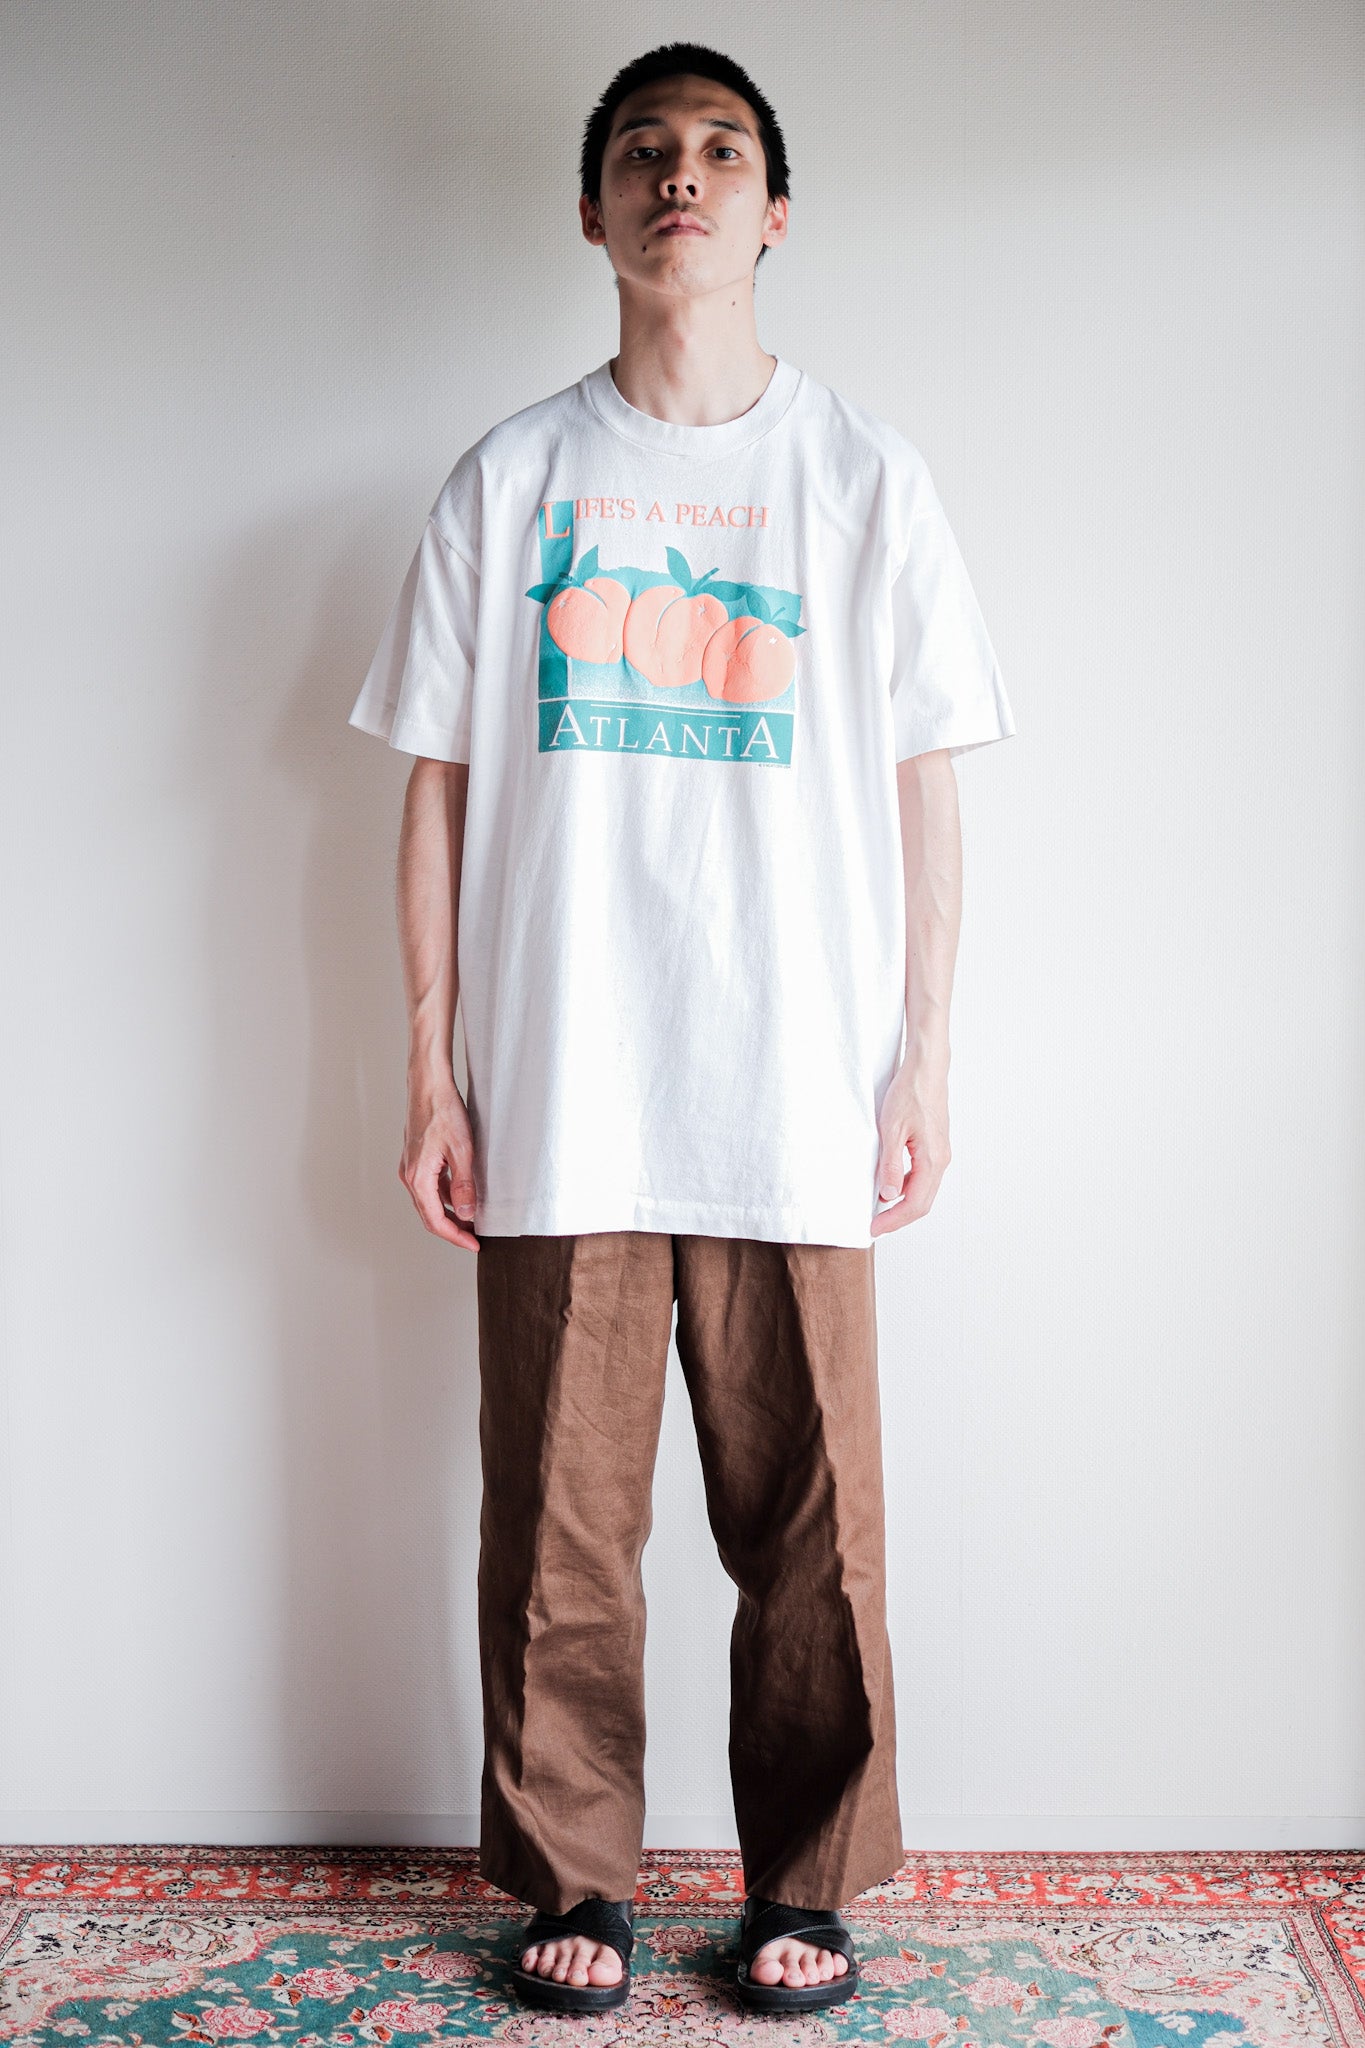 [~ 90's] Vintage Graphic Print T-Shirt Size.xl "Life's a Peach" "Made in U.S.A."